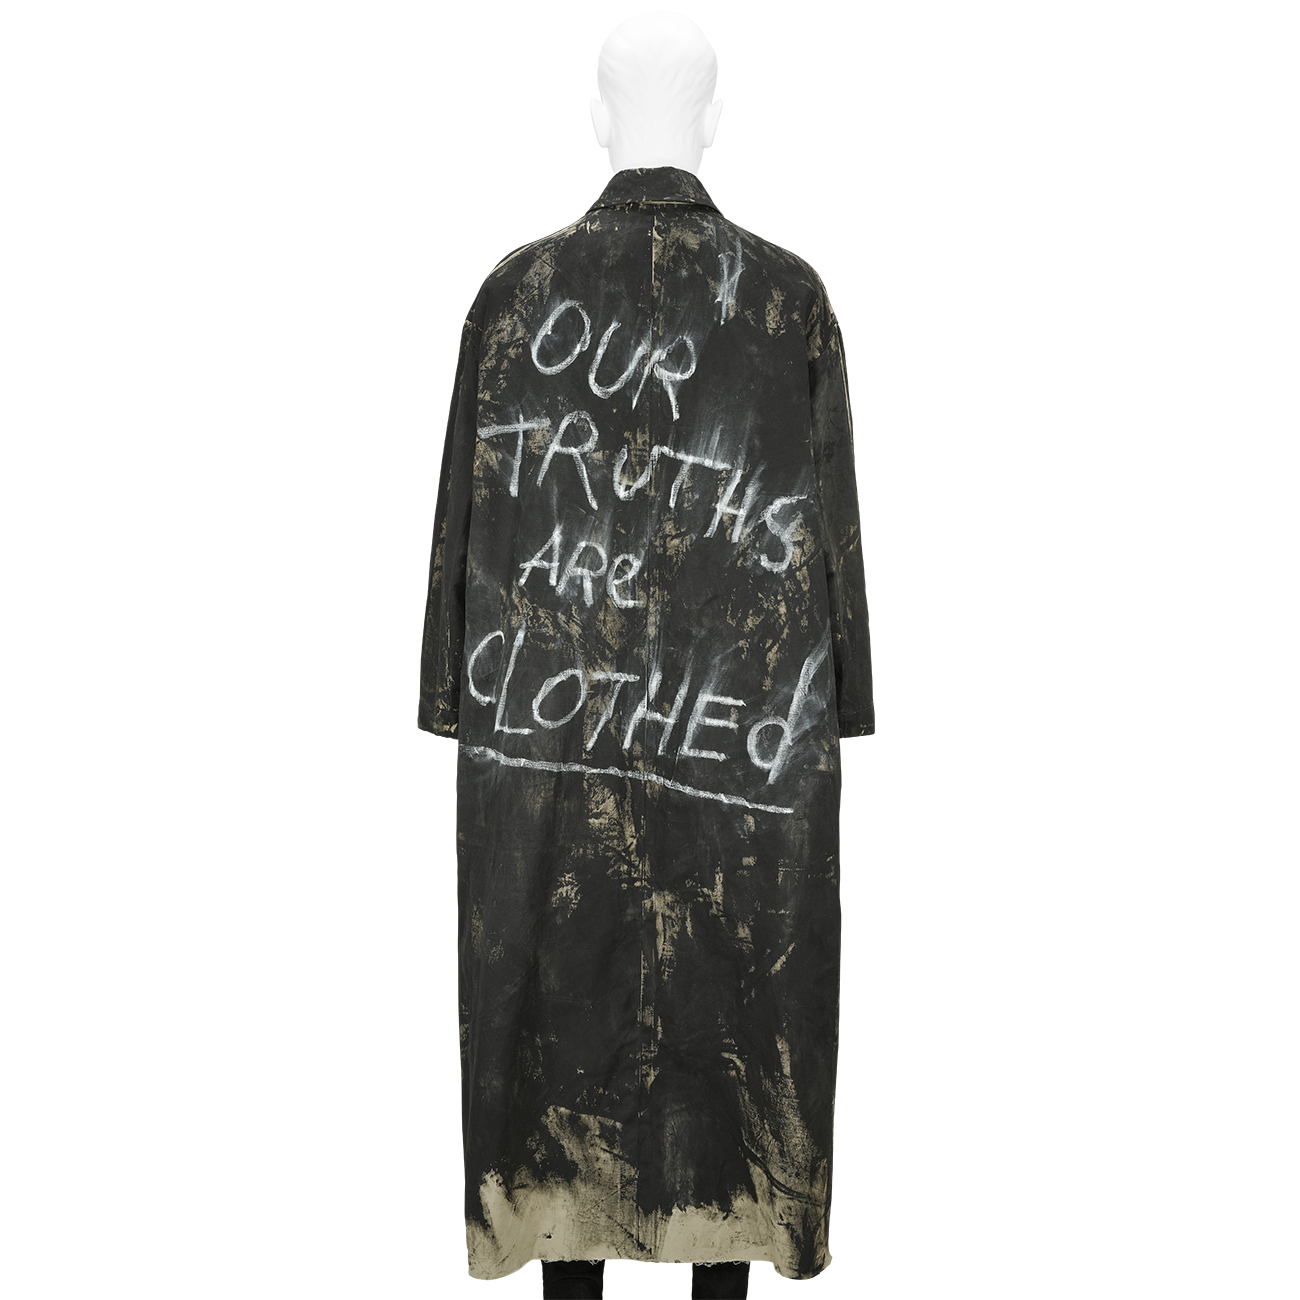 TIGRAN AVETISYAN×ELIMINATOR (ティグラン アヴェティスヤン×エリミネイター) - OUR TRUTHS ARE CLOTHED COAT BEIGE×BLACKの詳細画像1